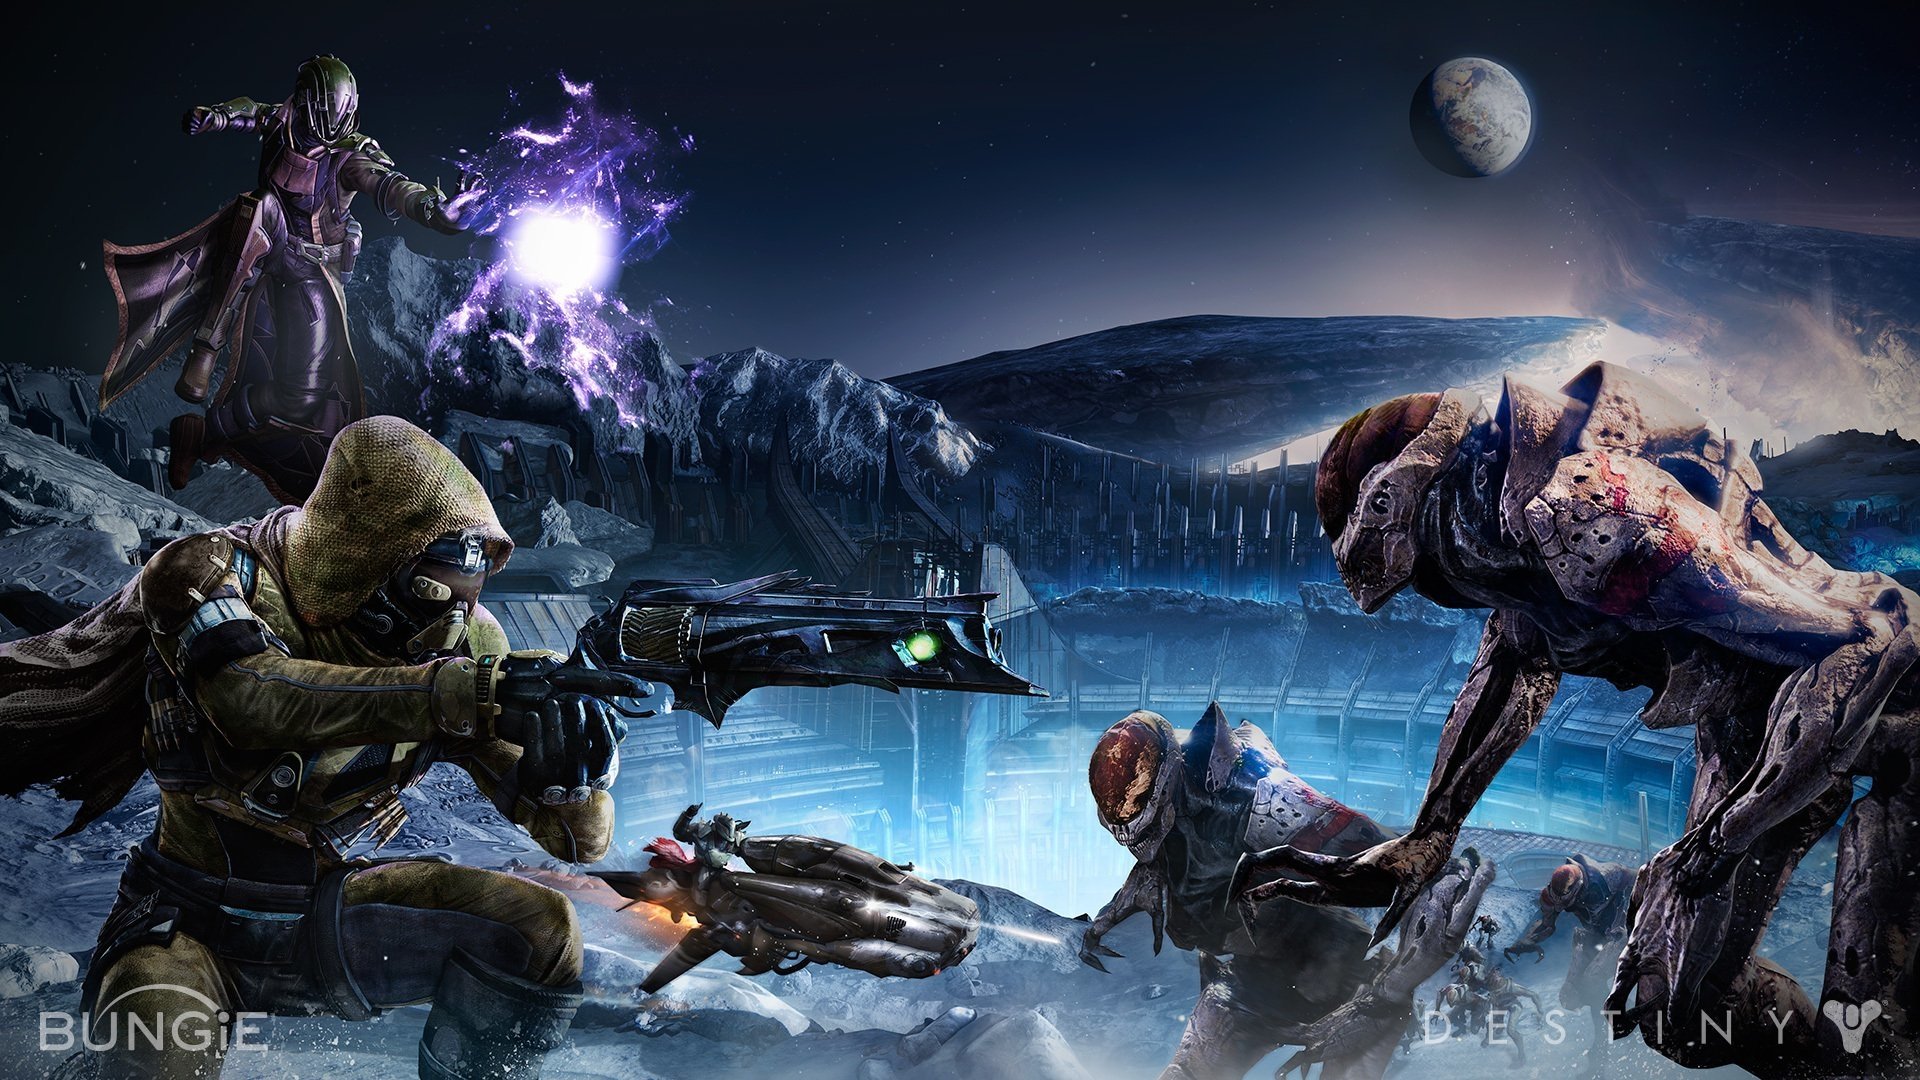 destiny wallpaper 4k,action adventure game,pc game,cg artwork,strategy video game,games